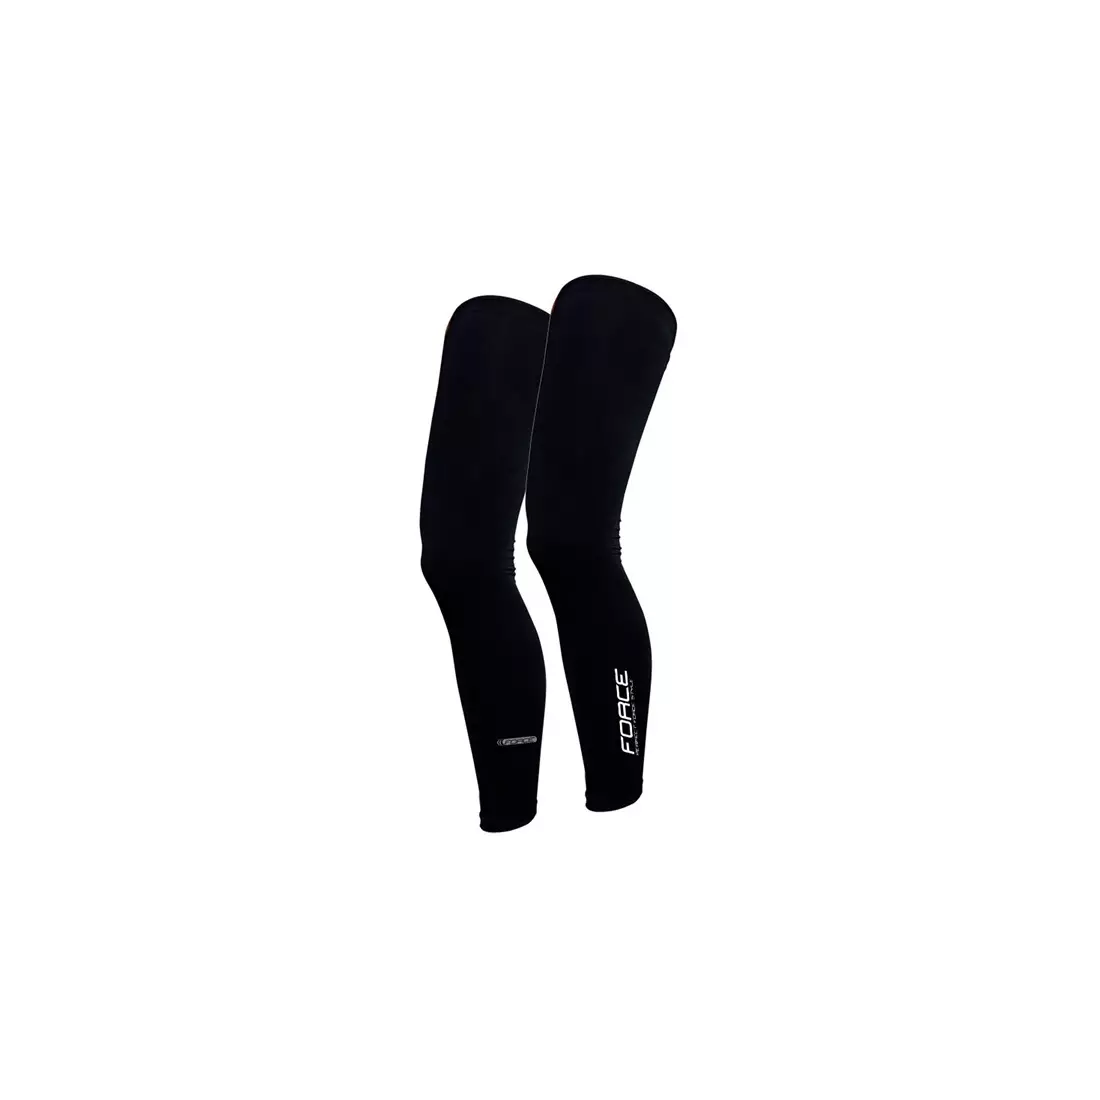 FORCE insulated bicycle legs black